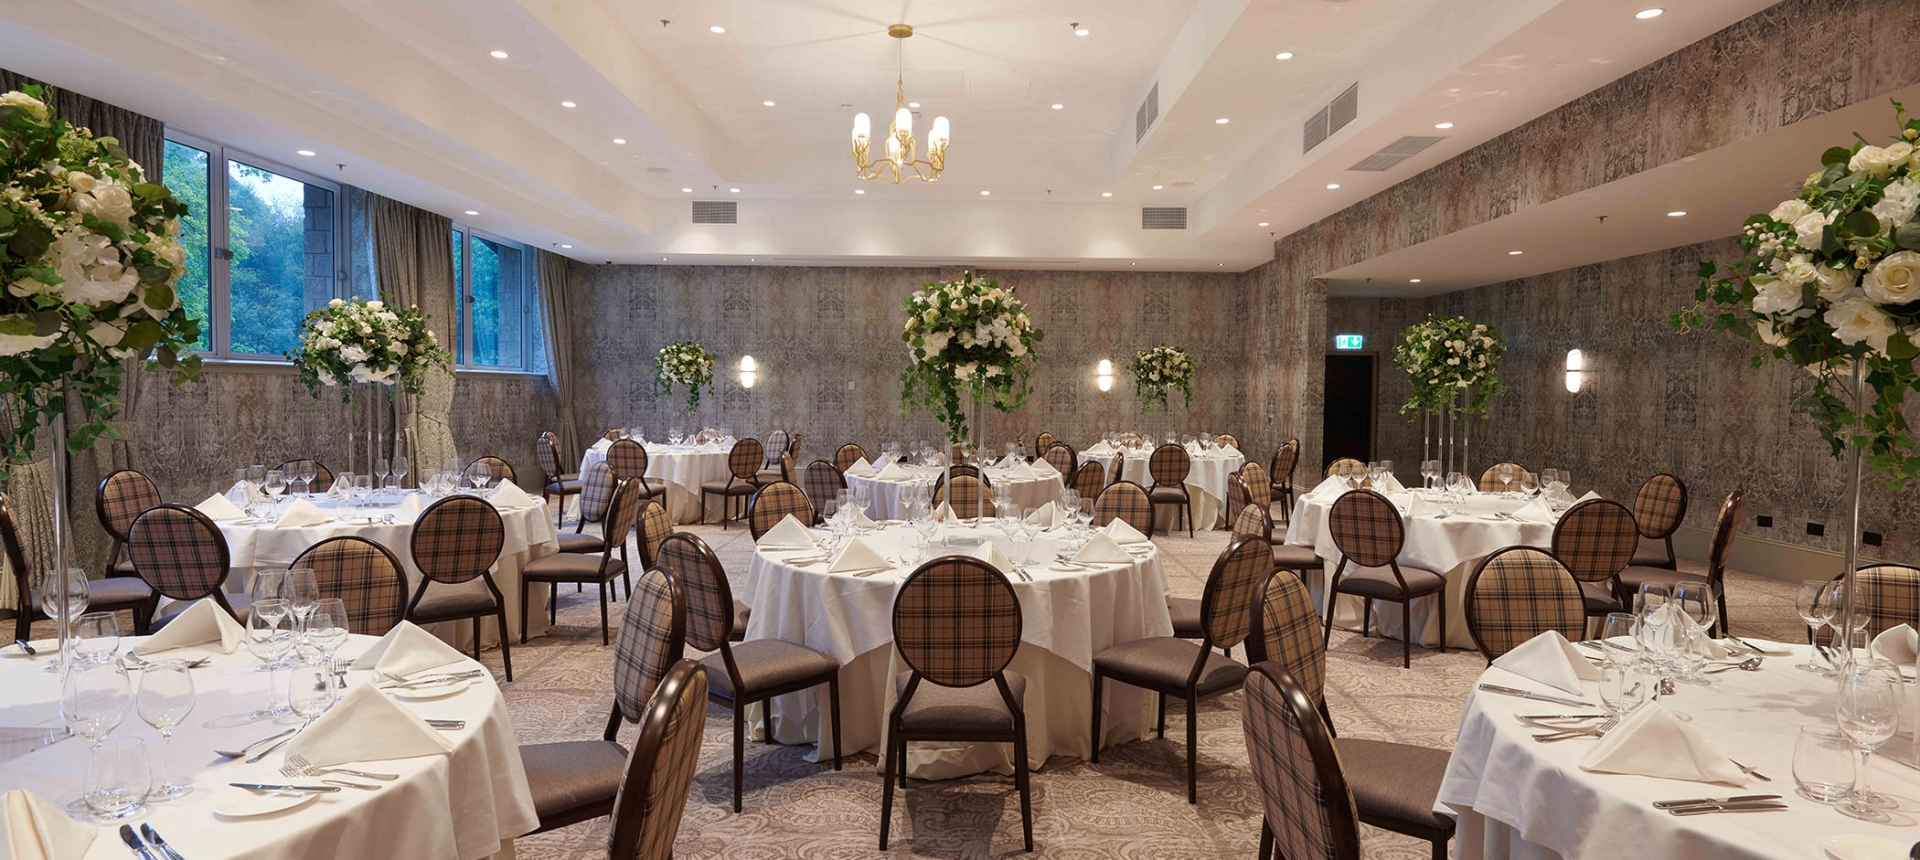 elegant chair and table arrangements inside a weeding space with side windows to look outside